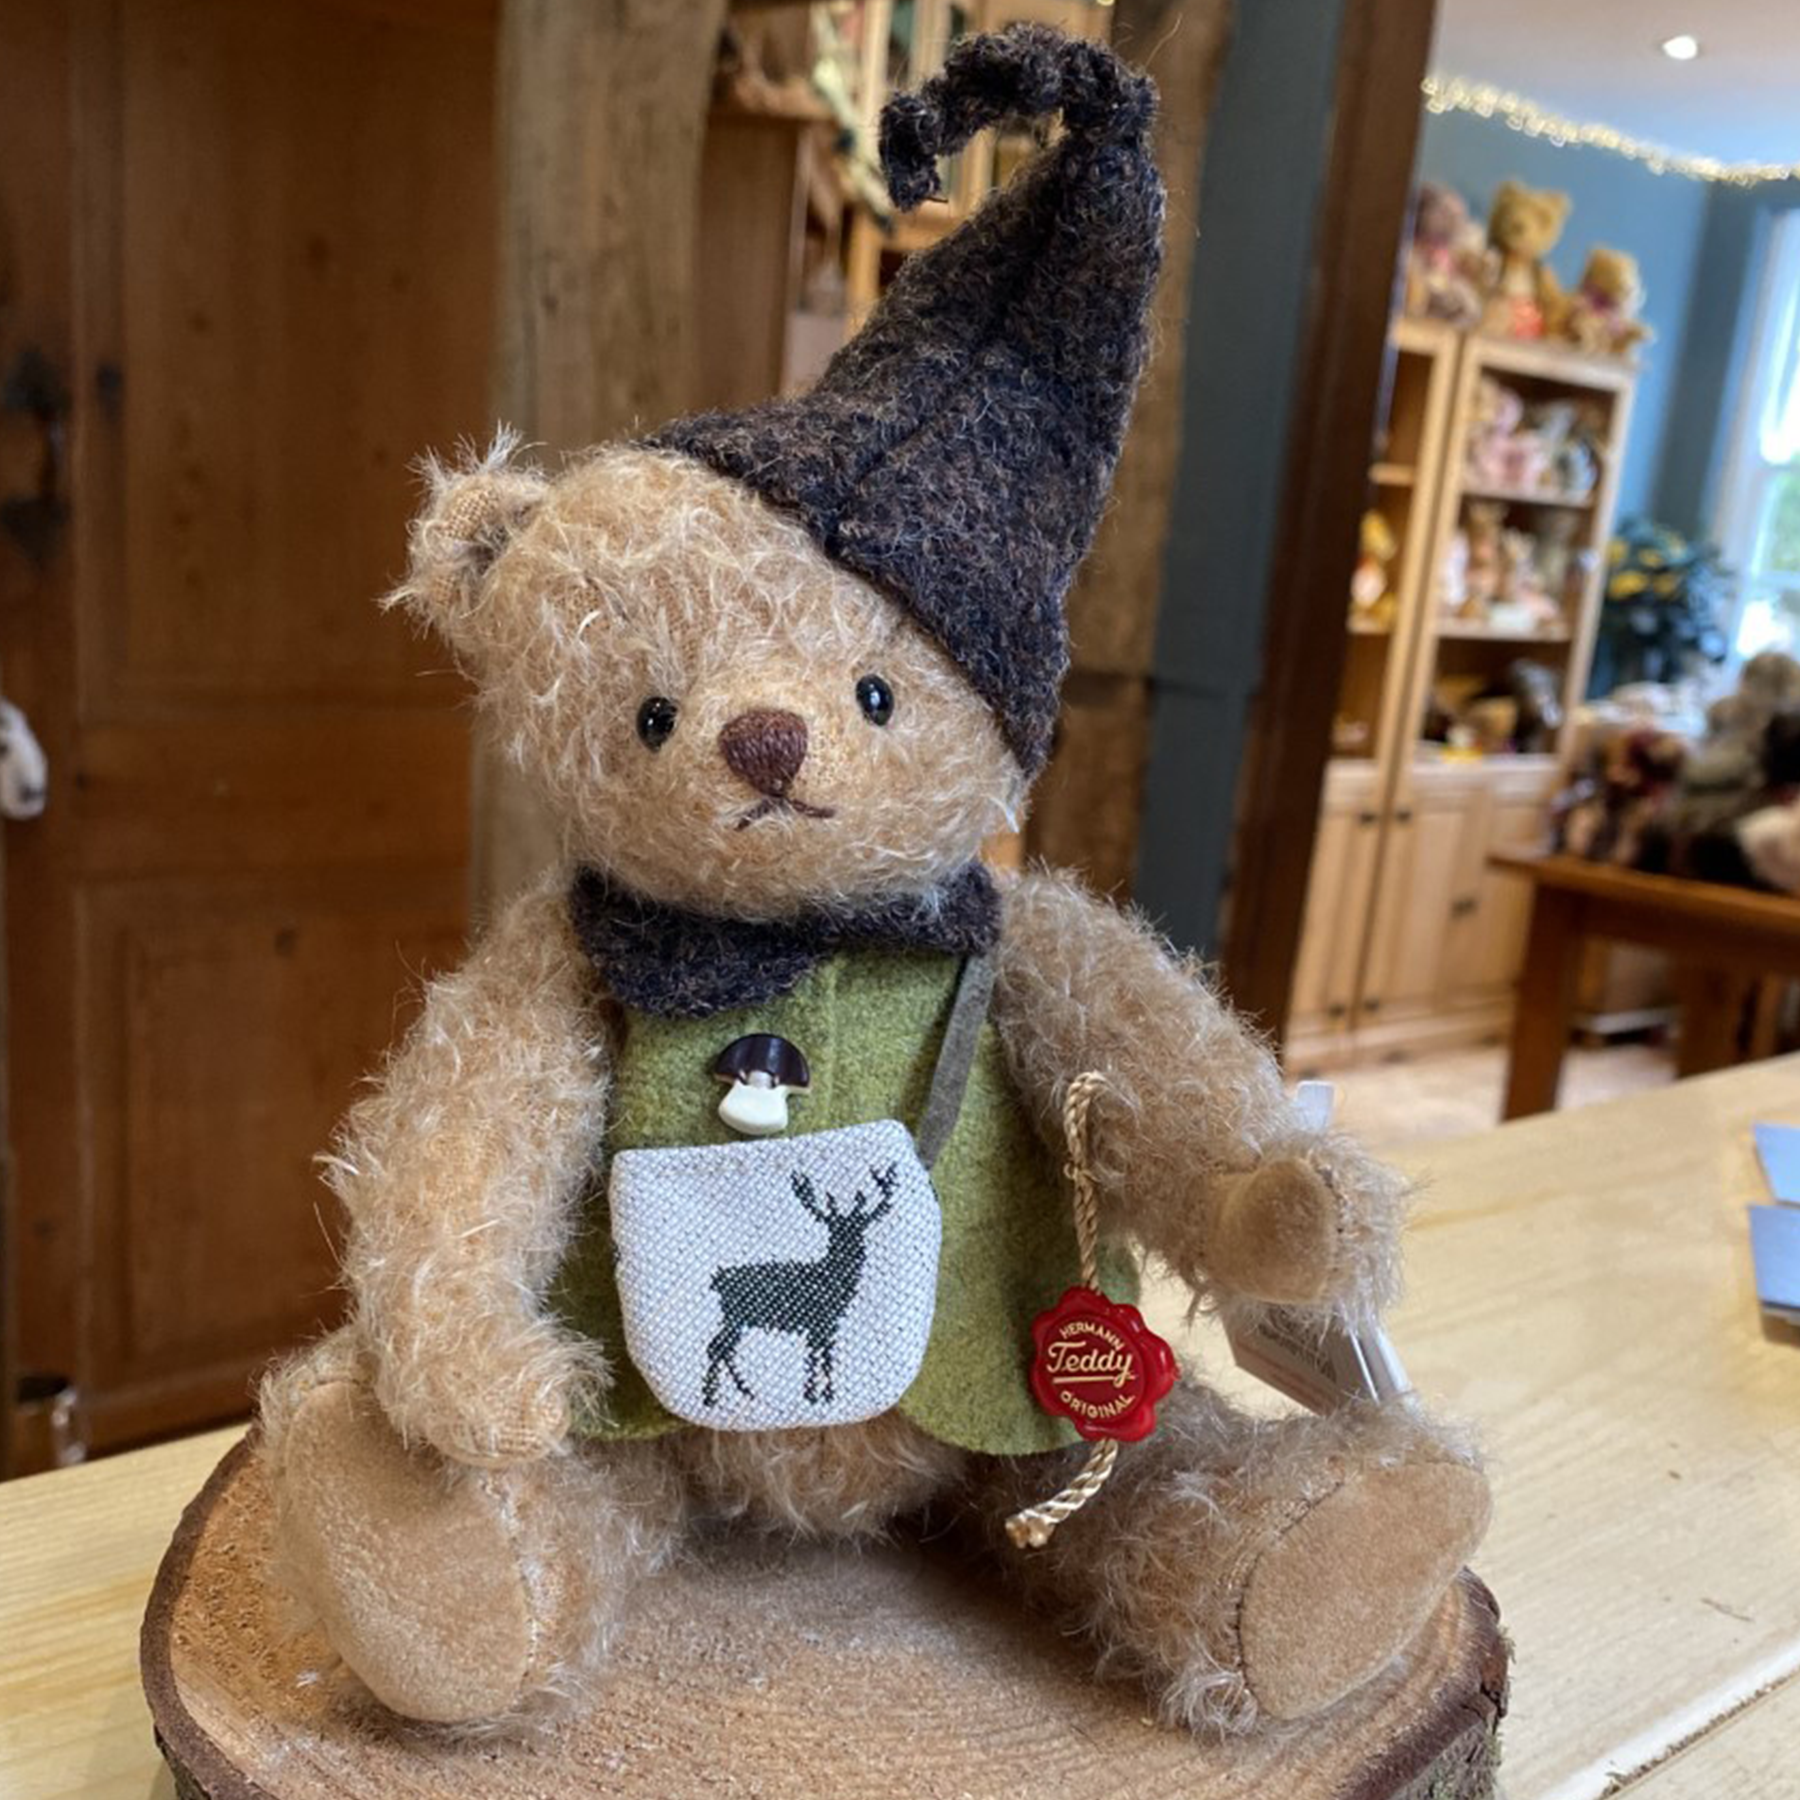 This little forest teddy stands at 20cm and is made from sparse distressed mohair.  Wearing a green jacket closed with a wooden mushroom button and carrying a shoulder bag with reindeer motif.  A brown pointed hat and matching collar finish this little ones outfit.  Limited to 200 pieces worldwide